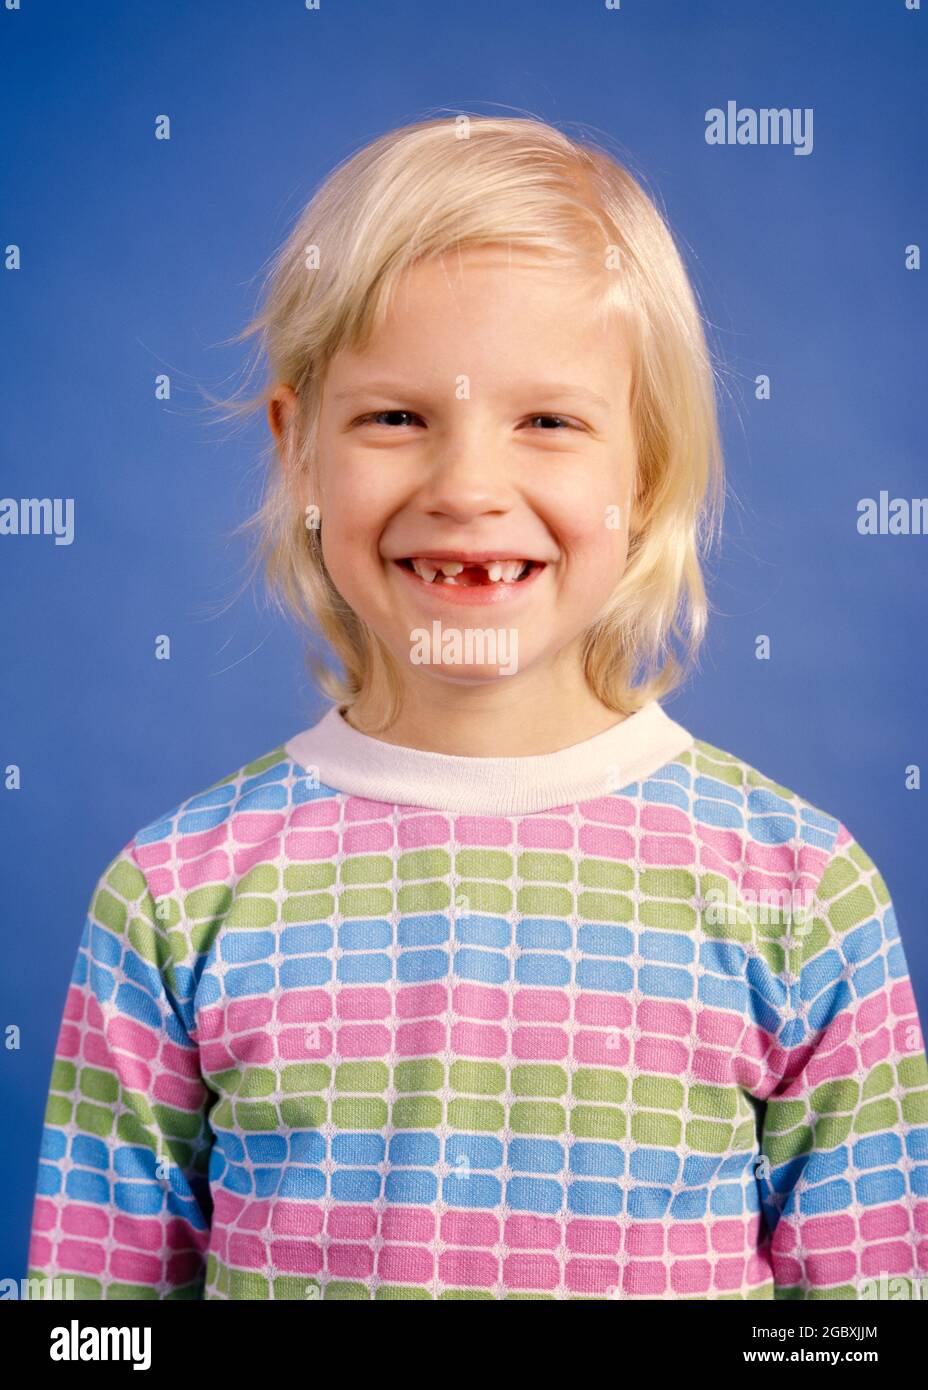 1970s SMILING BLOND GIRL MISSING HER FRONT TEETH LOOKING AT CAMERA WEARING PASTEL STRIPED SHIRT - kj8228 HAR001 HARS STUDIO SHOT HEALTHINESS HOME LIFE COPY SPACE HALF-LENGTH MISSING CONFIDENCE EYE CONTACT HUMOROUS HAPPINESS CHEERFUL DISCOVERY SMILES JOYFUL PLEASANT AGREEABLE CHARMING GROWTH JUVENILES LOVABLE PASTEL PLEASING ADORABLE APPEALING CAUCASIAN ETHNICITY HAR001 OLD FASHIONED Stock Photo